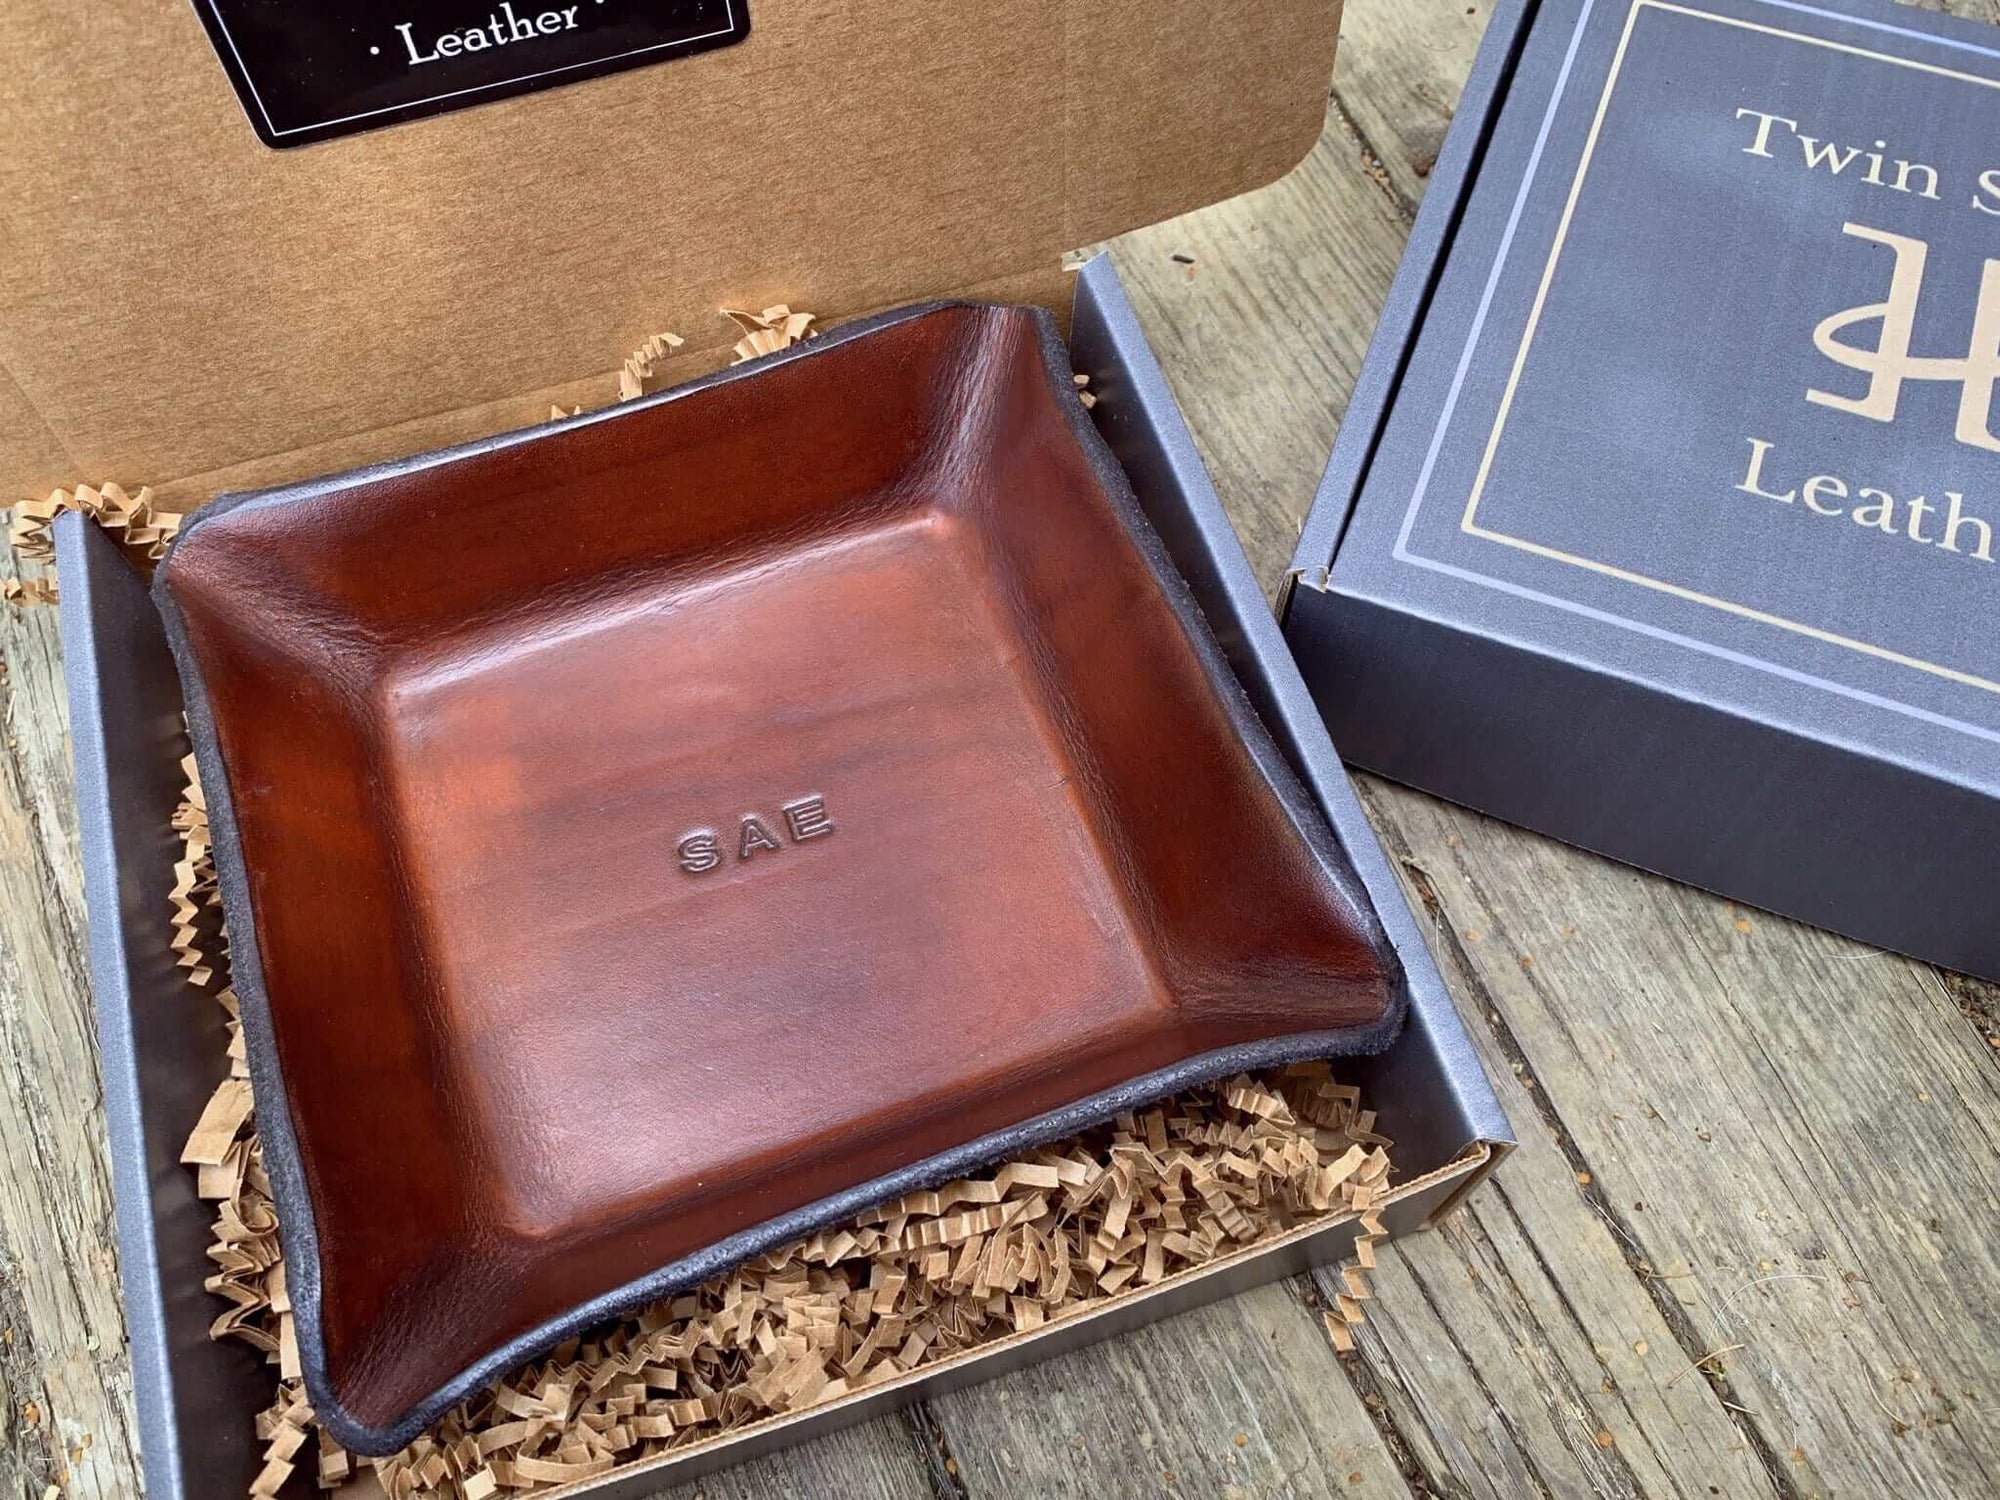 Twin Saints Leather Groomsmen Gift. Square Monogrammed Leather Tray in Box.